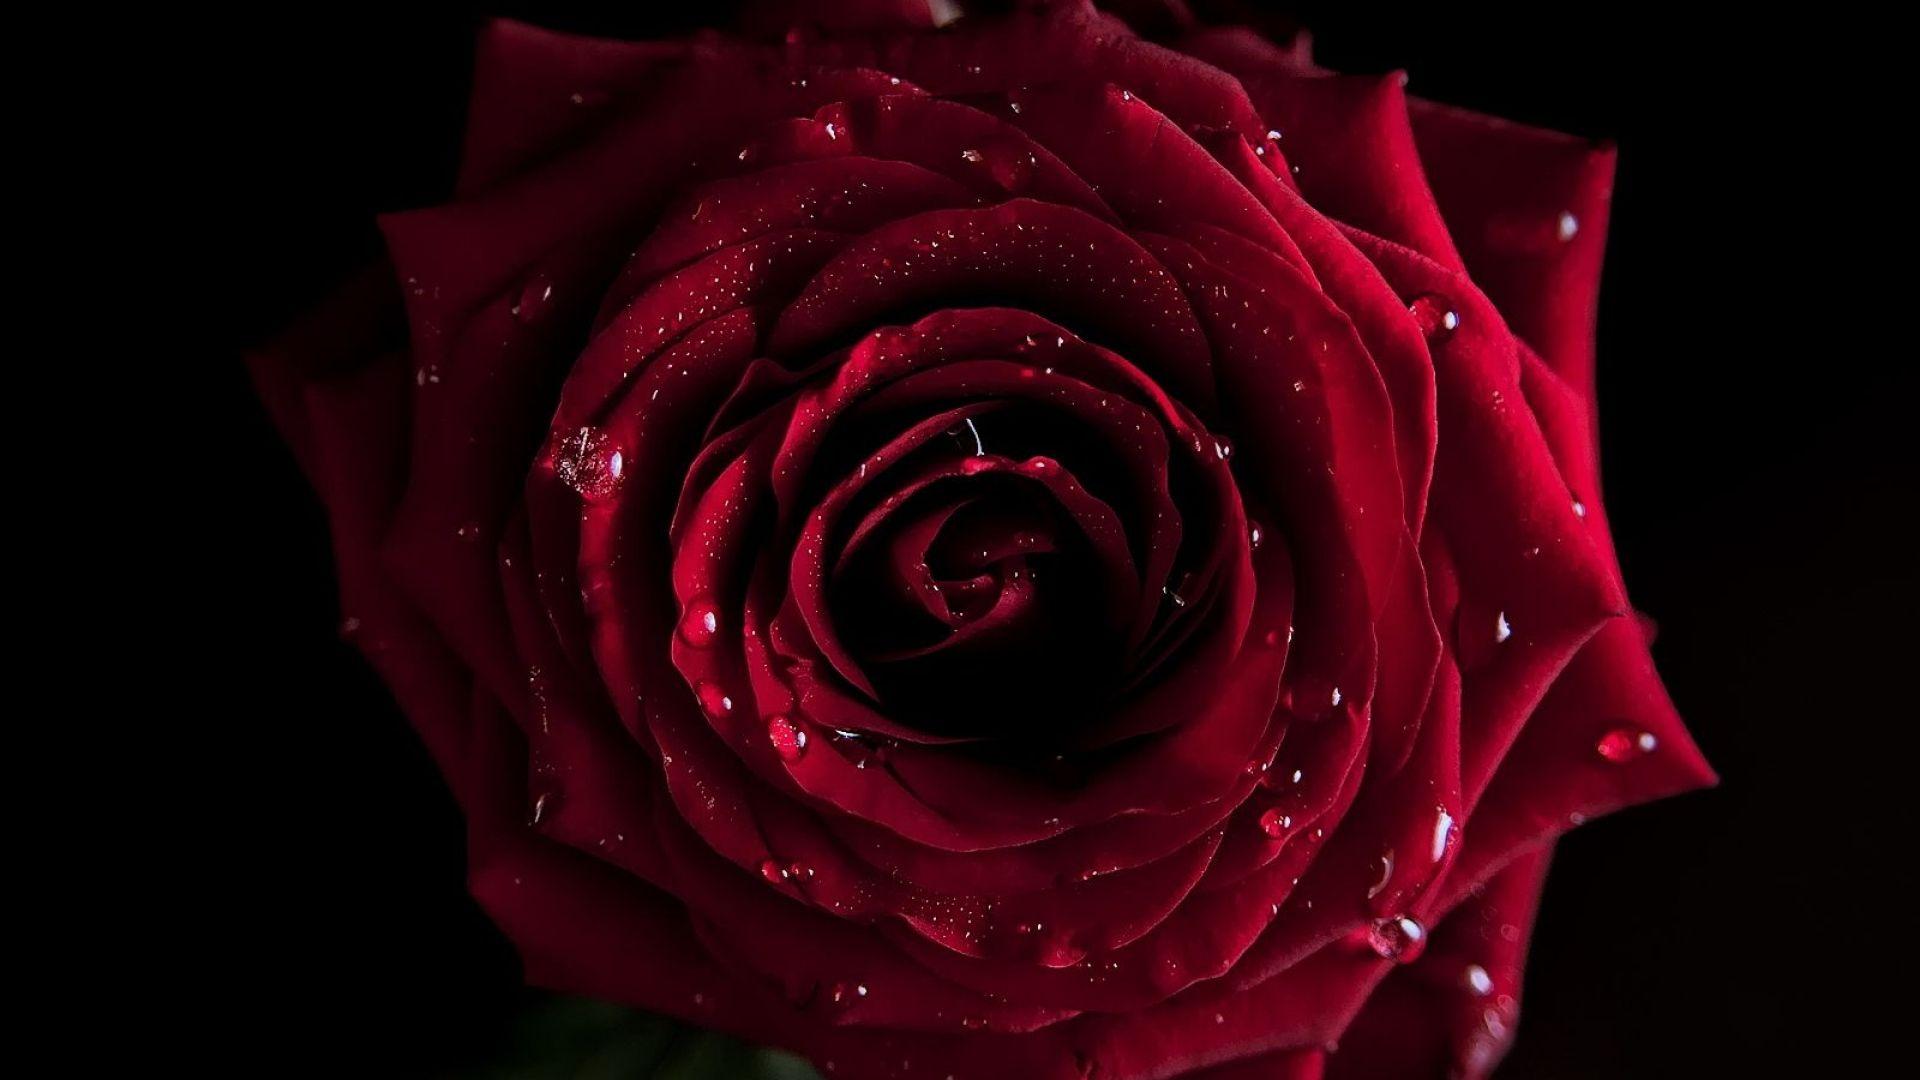 Black And Red Rose Wallpapers - Wallpaper Cave